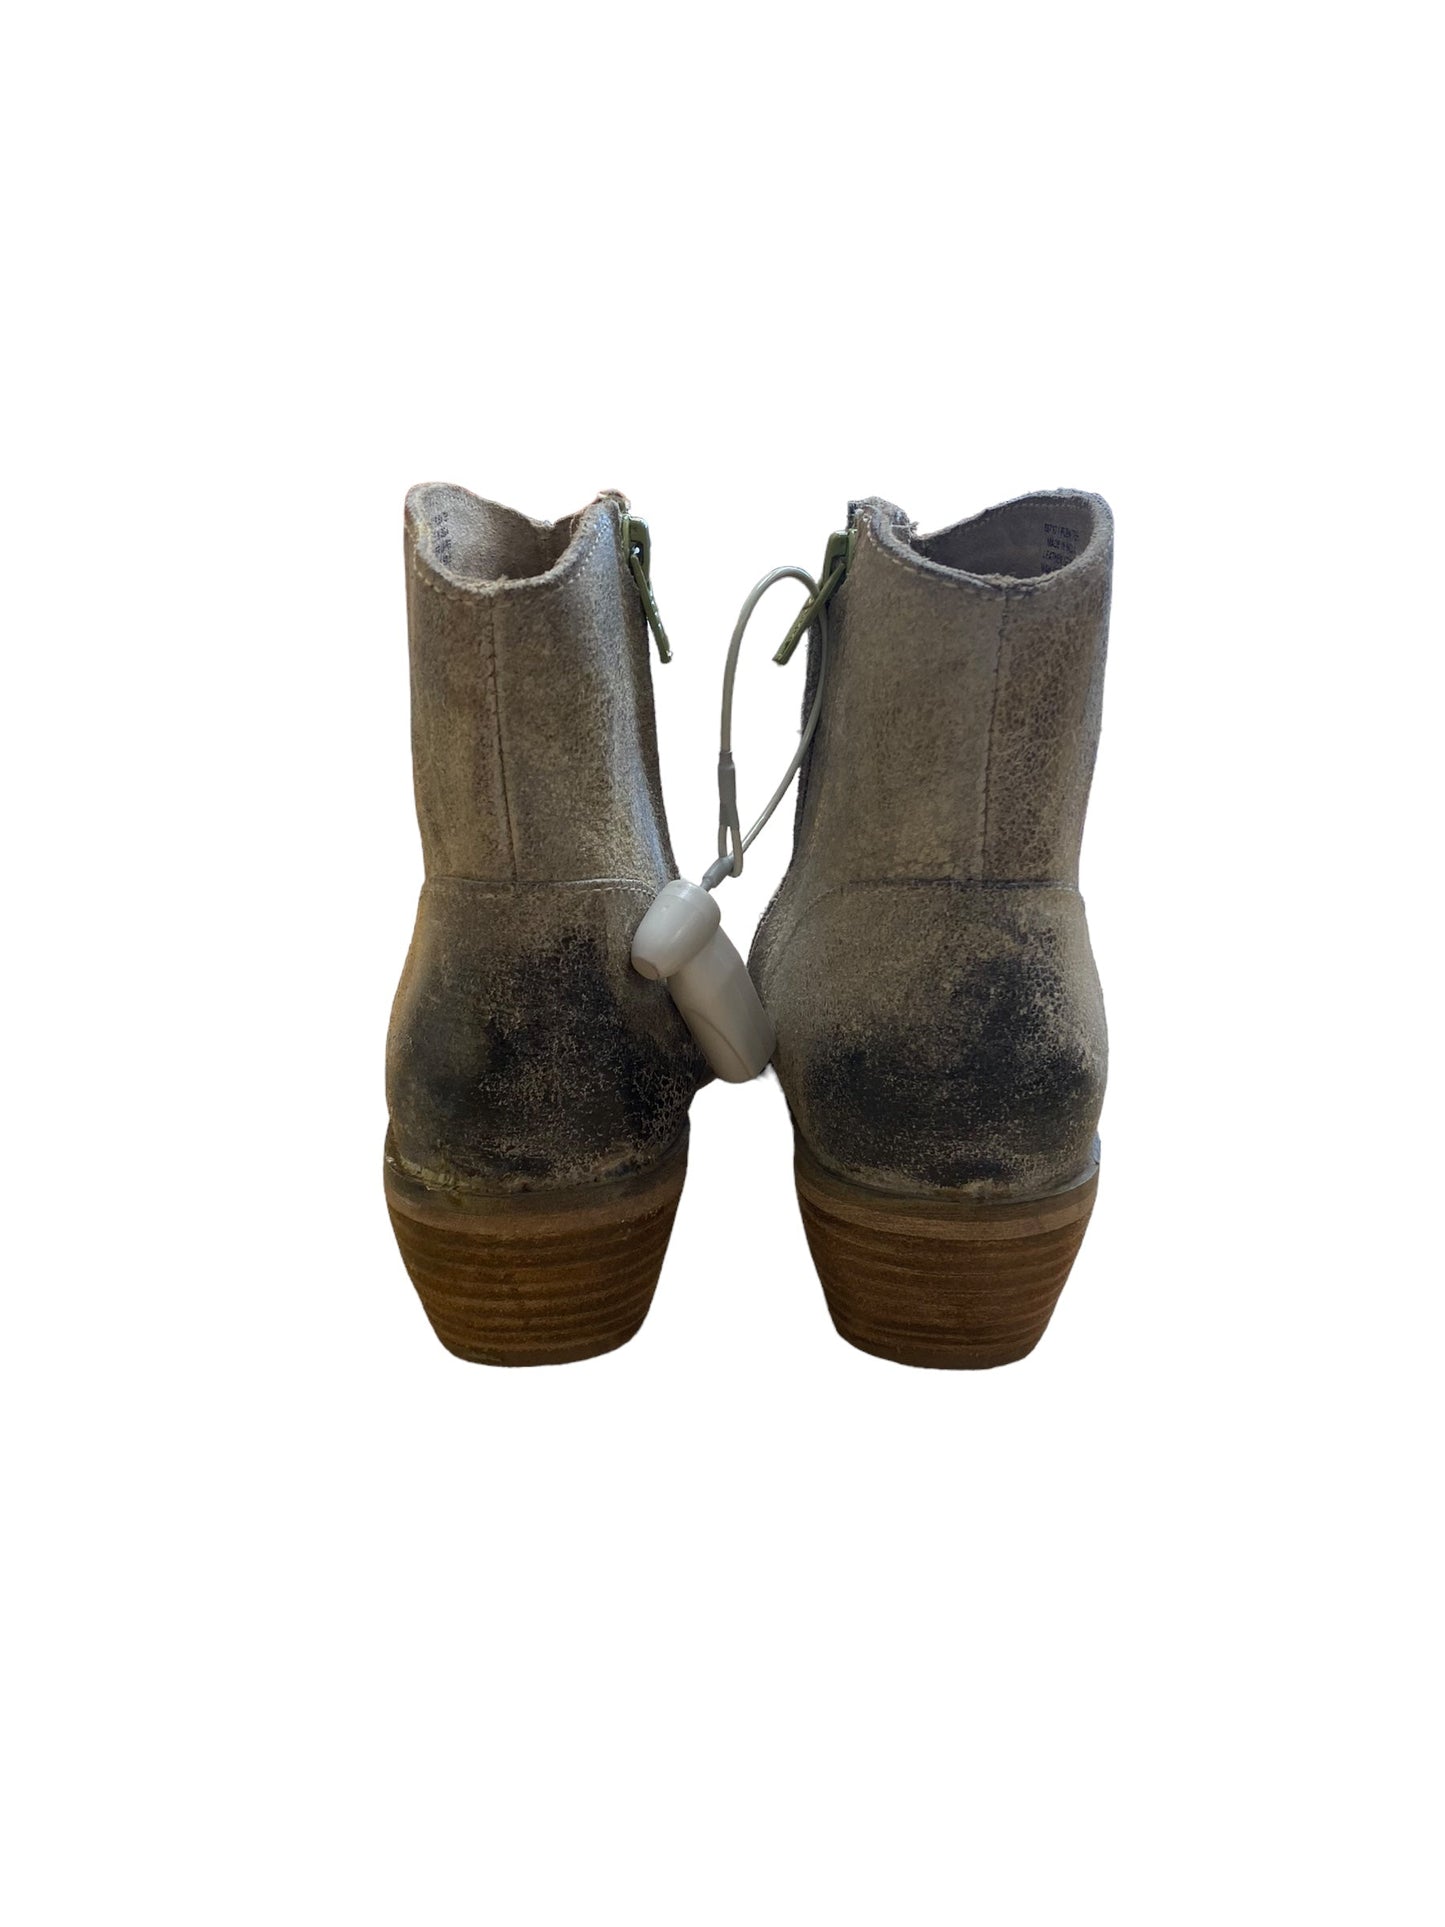 Taupe Boots Western Diba, Size 6.5